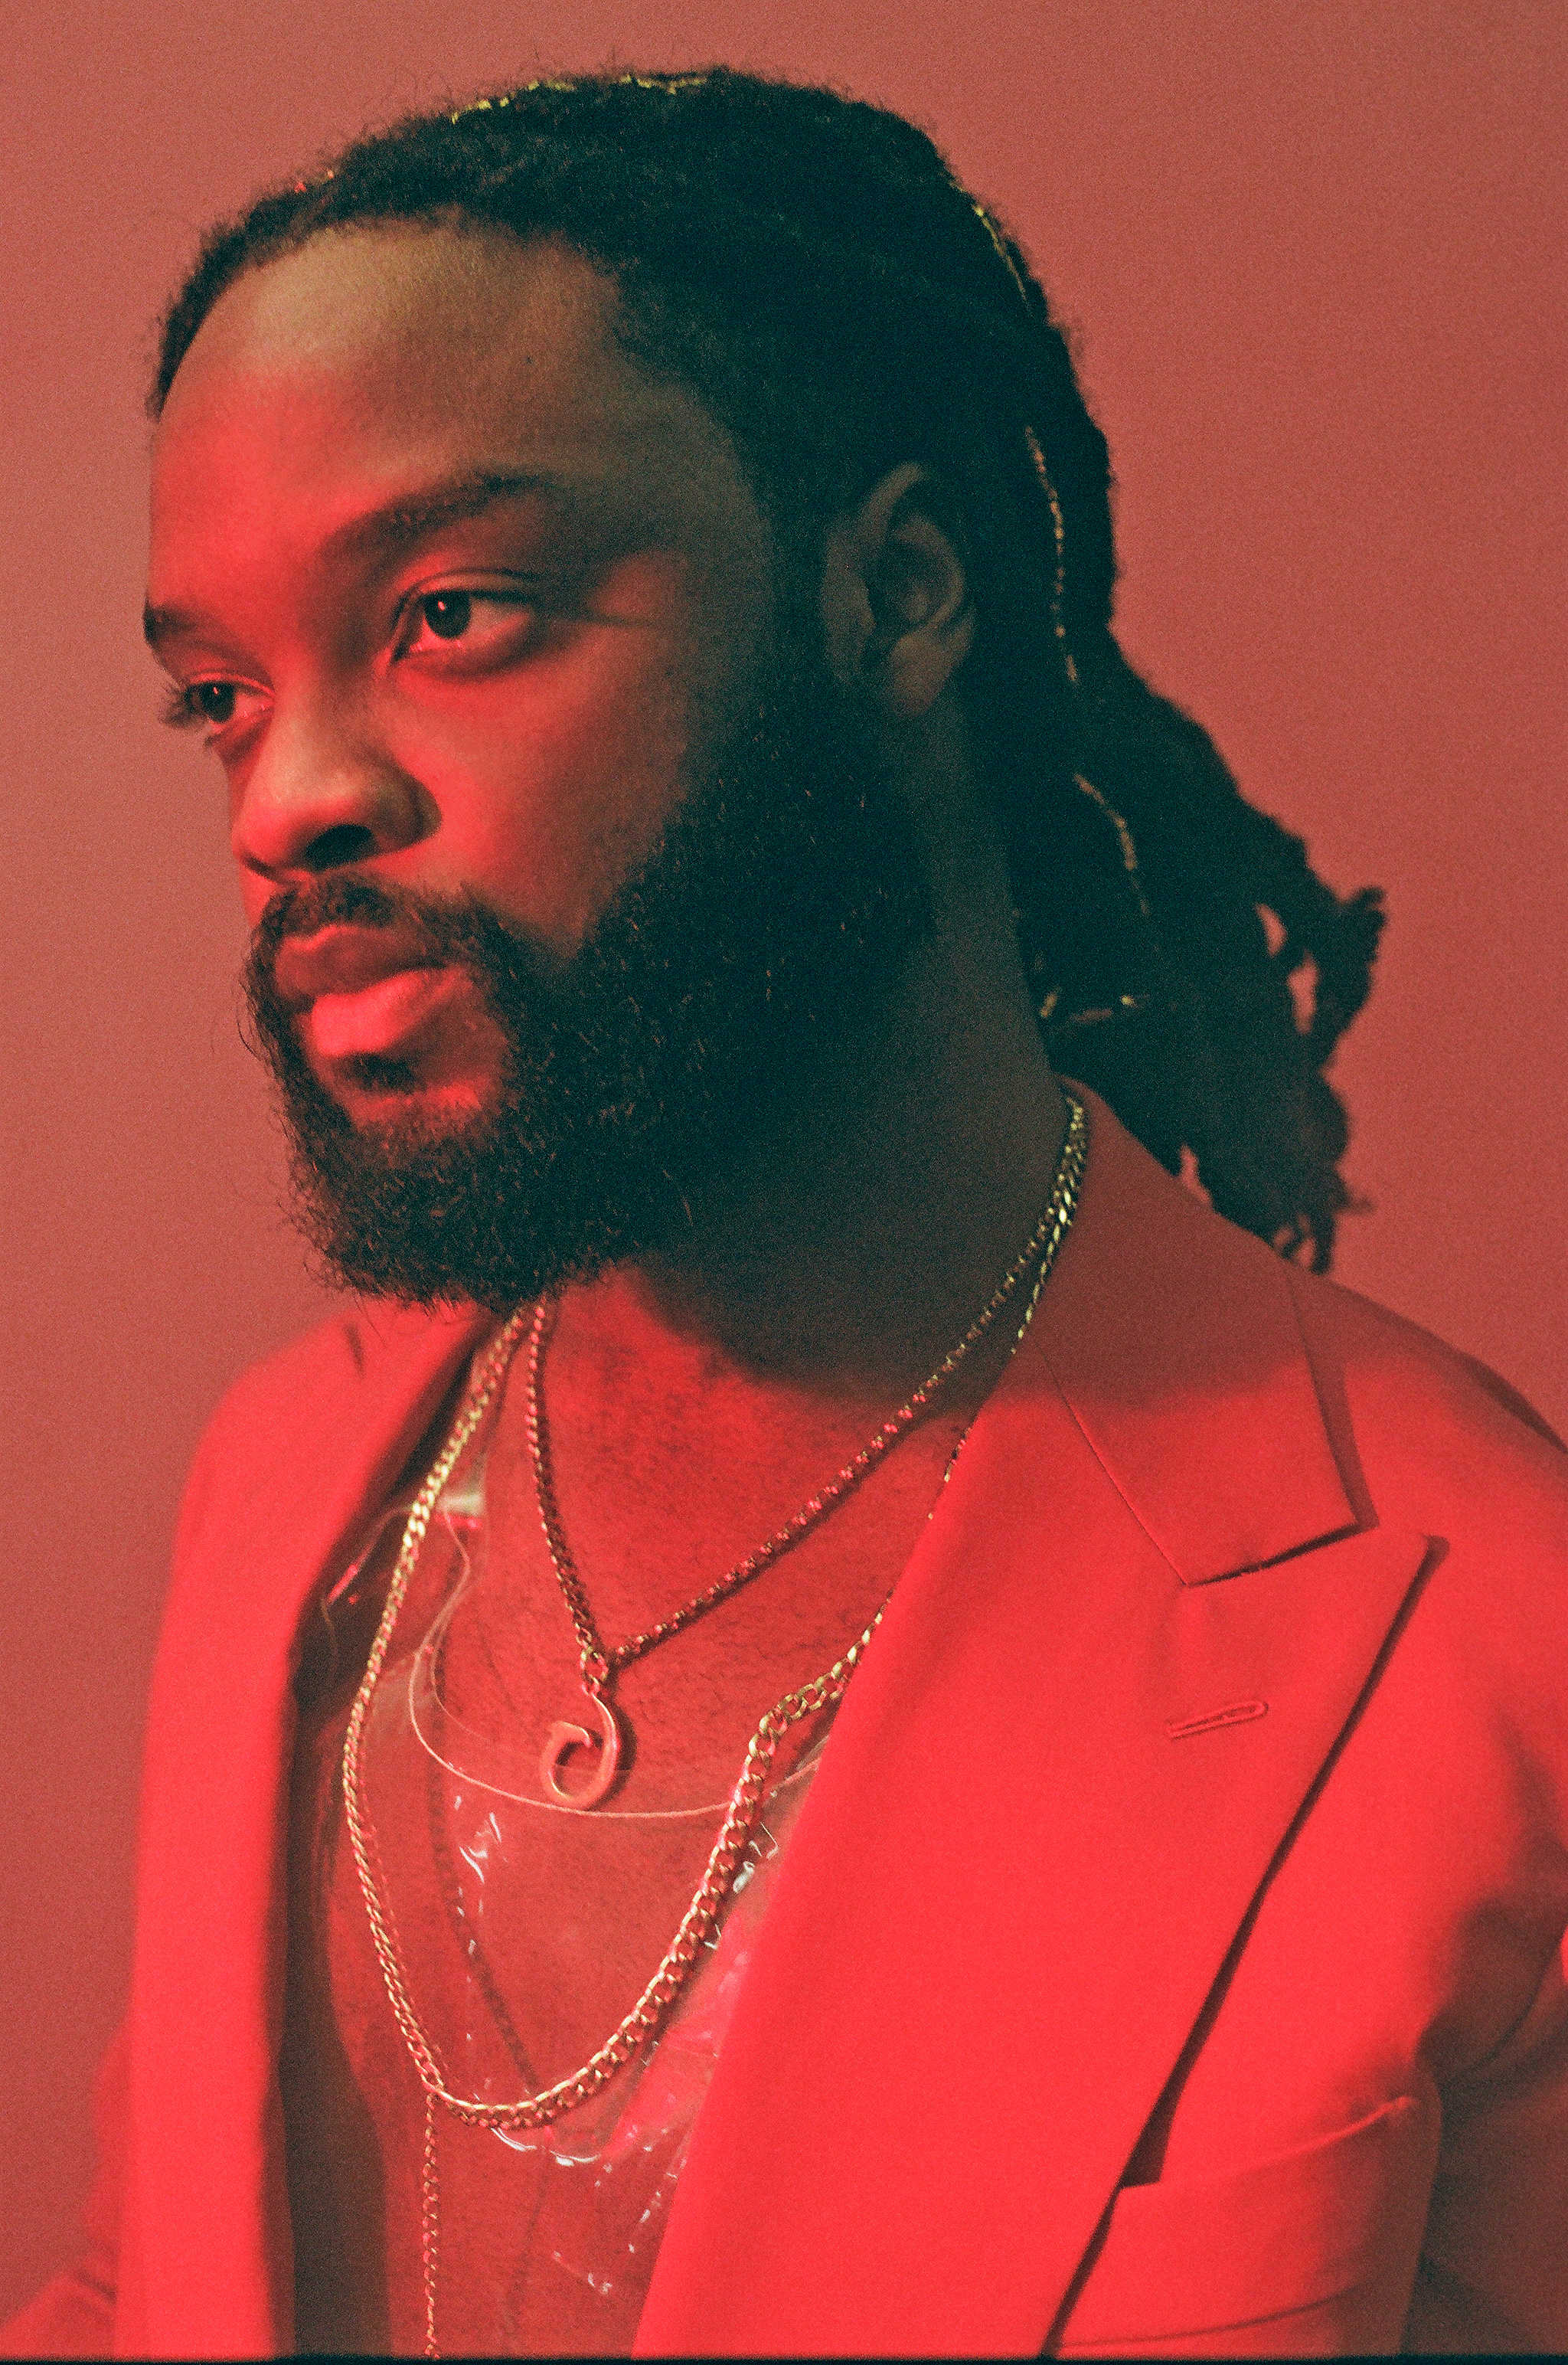 Genesis Owusu, a Ghanian Australian musician with dark dreadlocks and a beard, wears a red blazer and gold chains. Genesis Owusu is looking off to the left and the scene is bathed in red light.